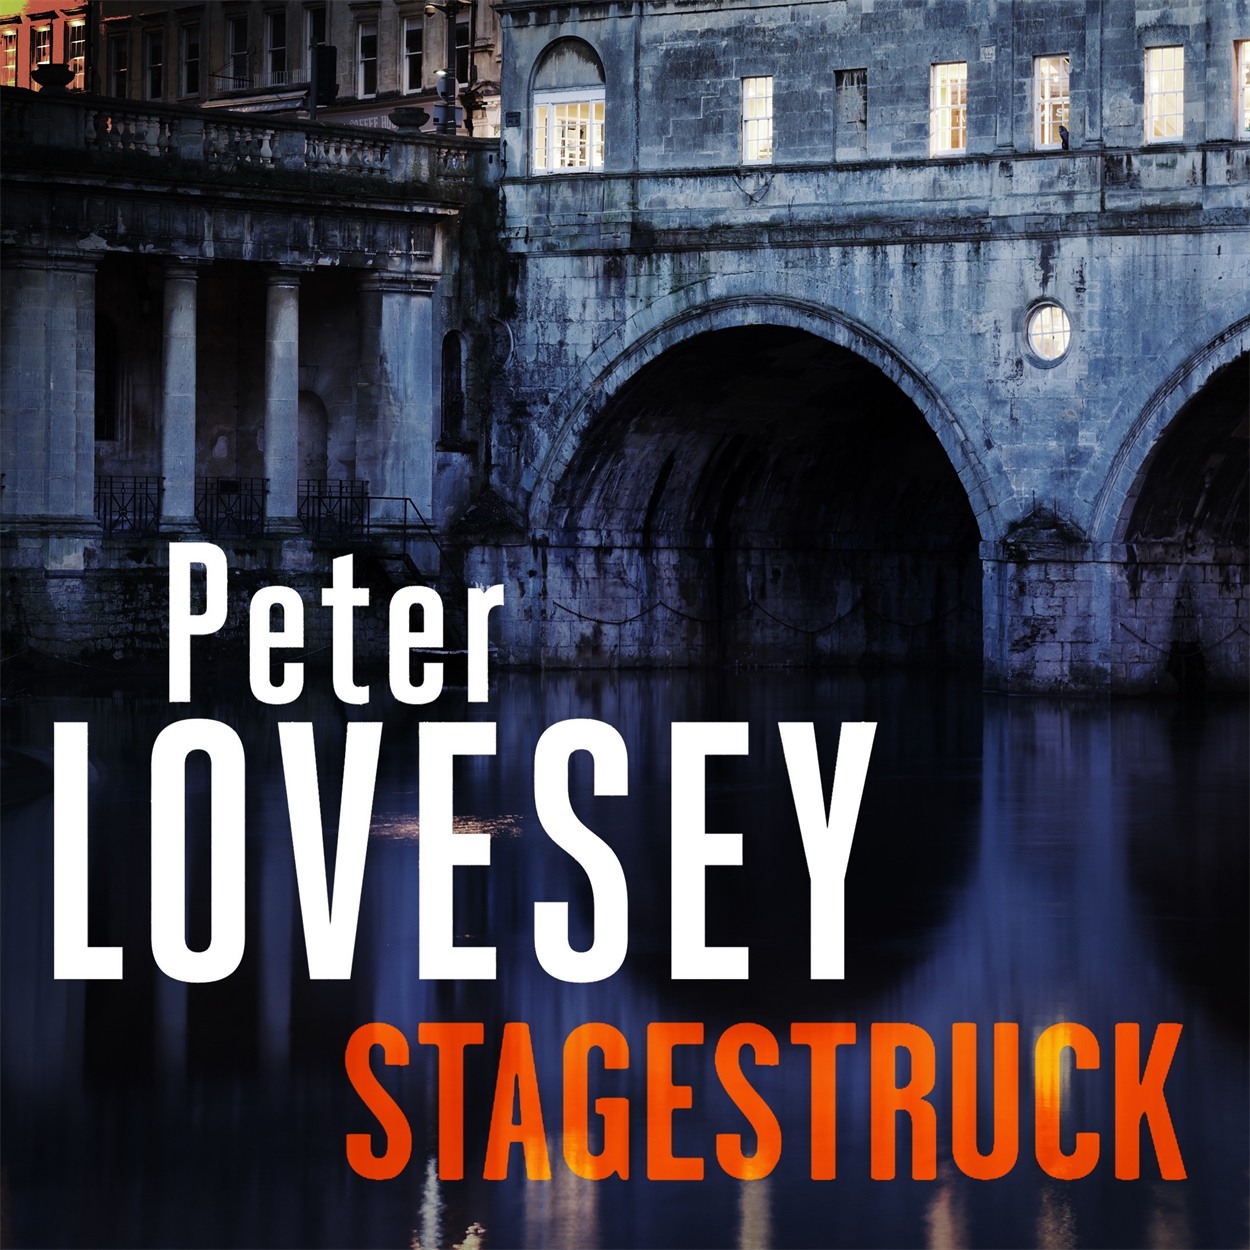 stagestruck peter lovesey